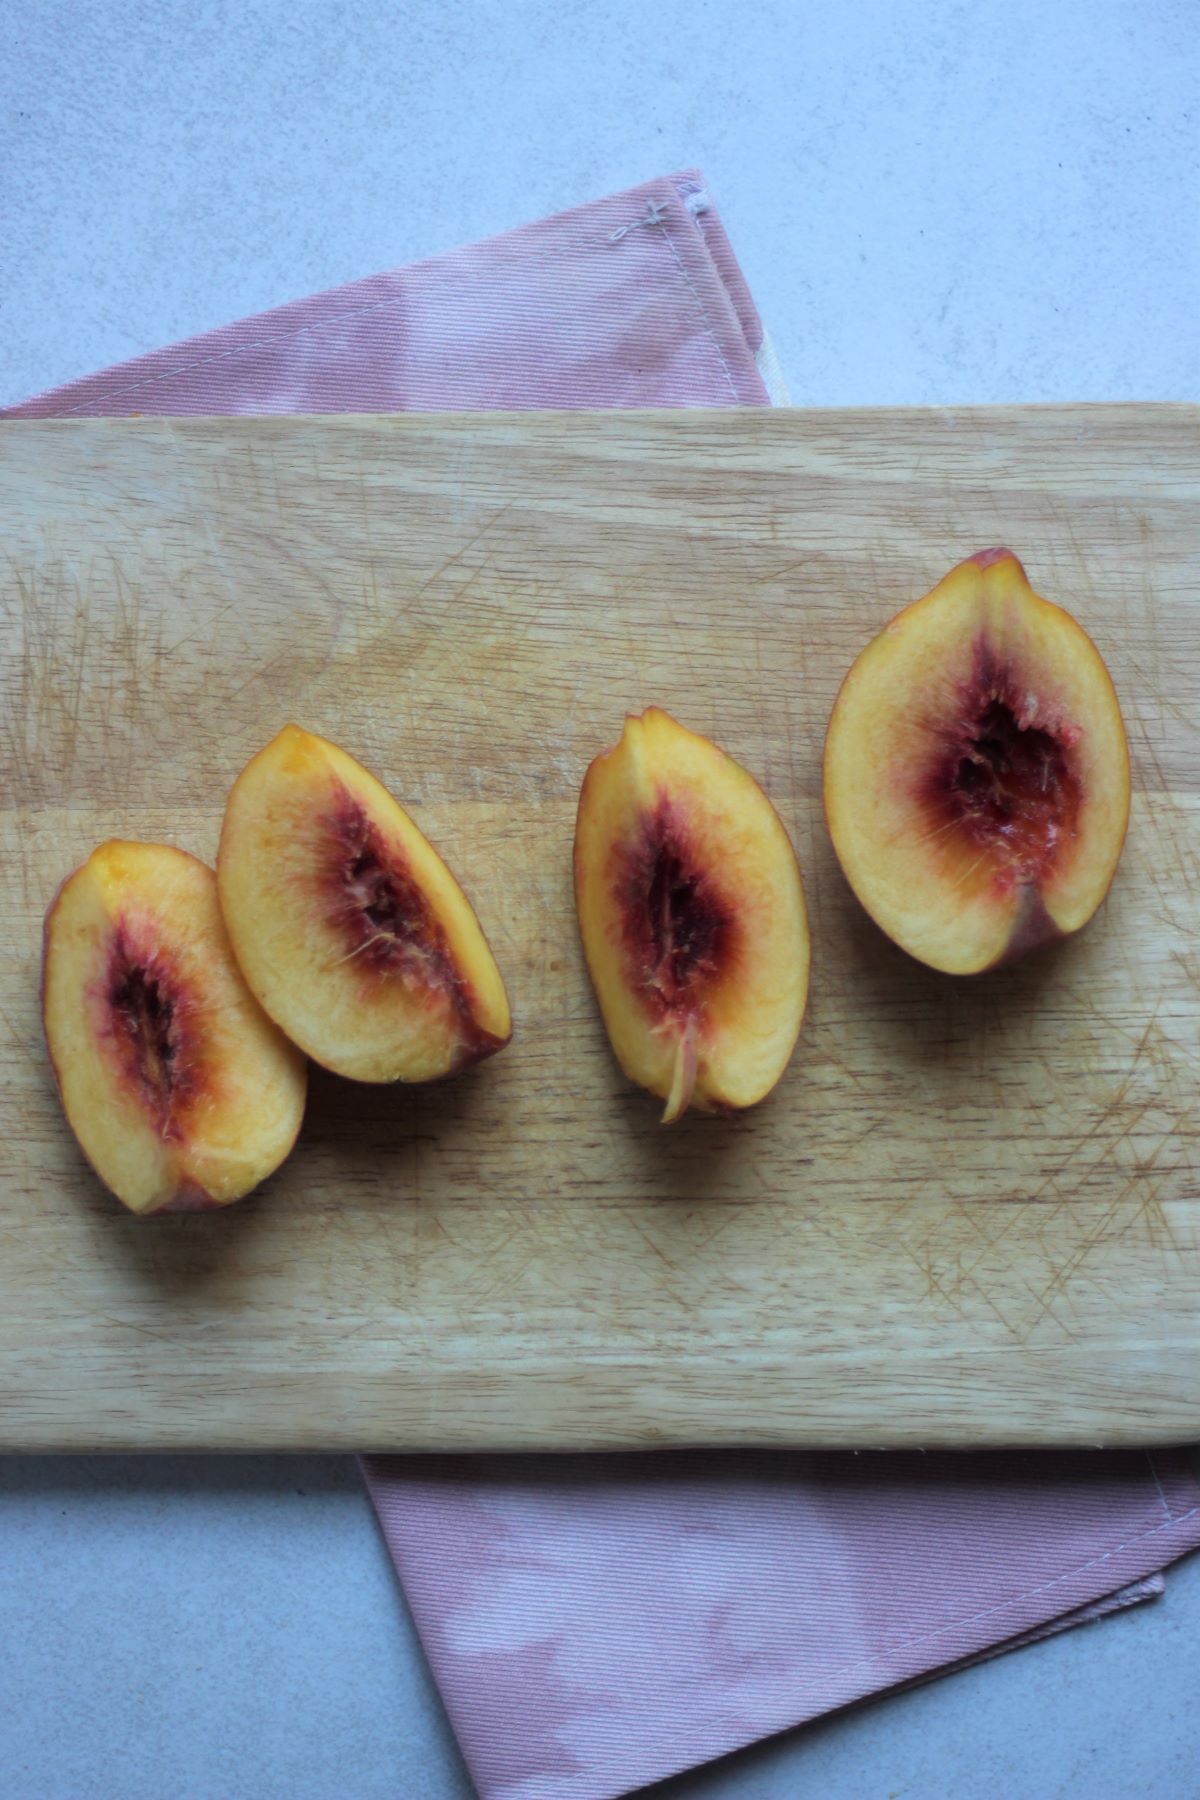 Four peach quarters on a wooden board.